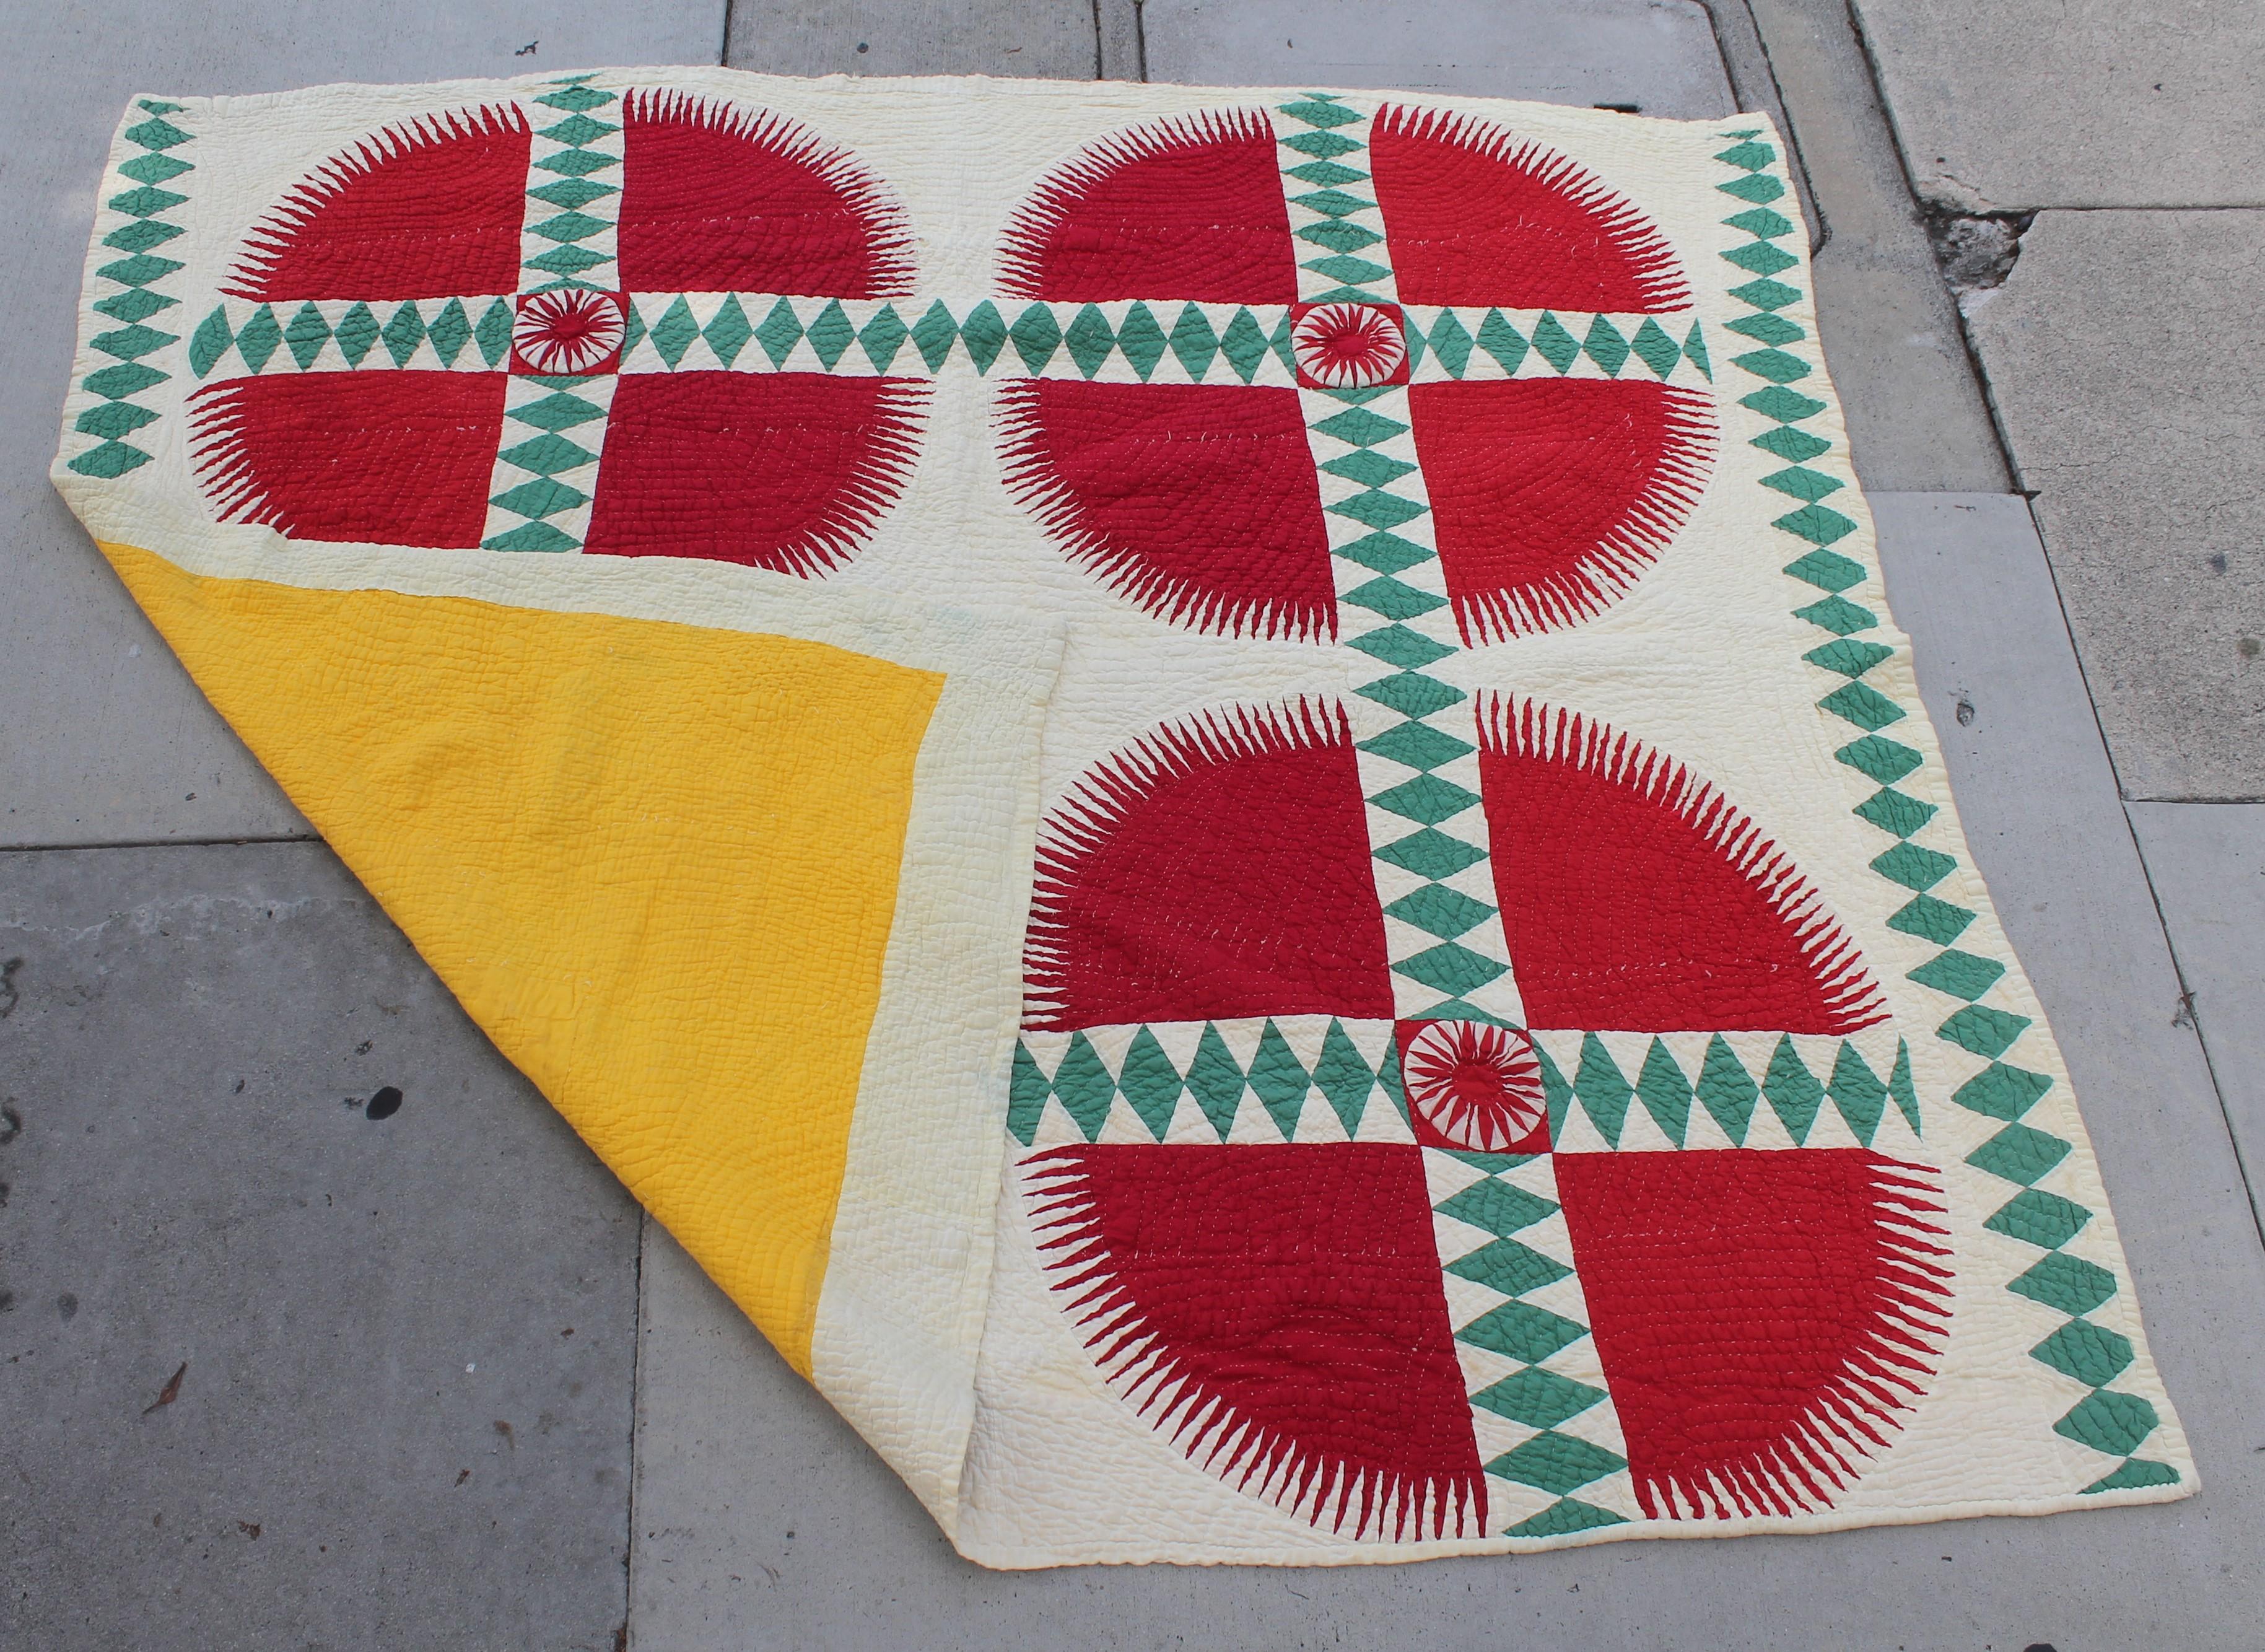 This fantastic southern quilt is a New York Beauty pattern and was found in Virginia. The pristine and vibrant red and green would make a fantastic Christmas gift or for your wall at Xmas time. This comes from a wonderful folk art collection out of